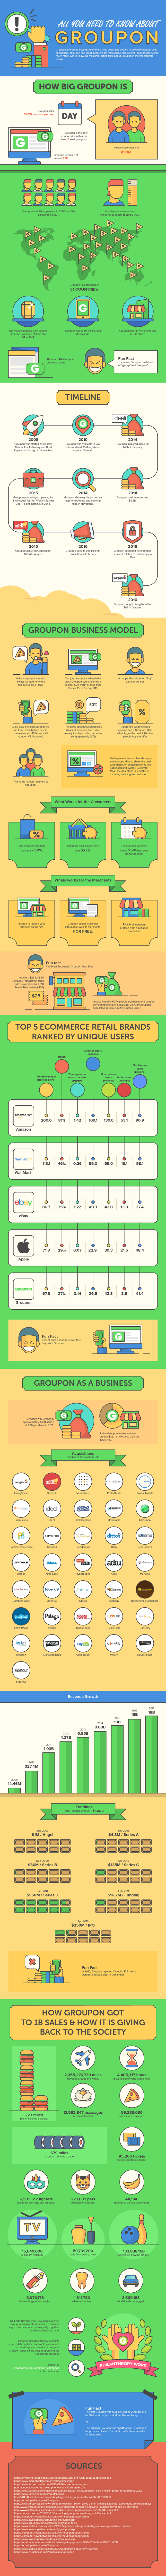 Infographic - Groupon